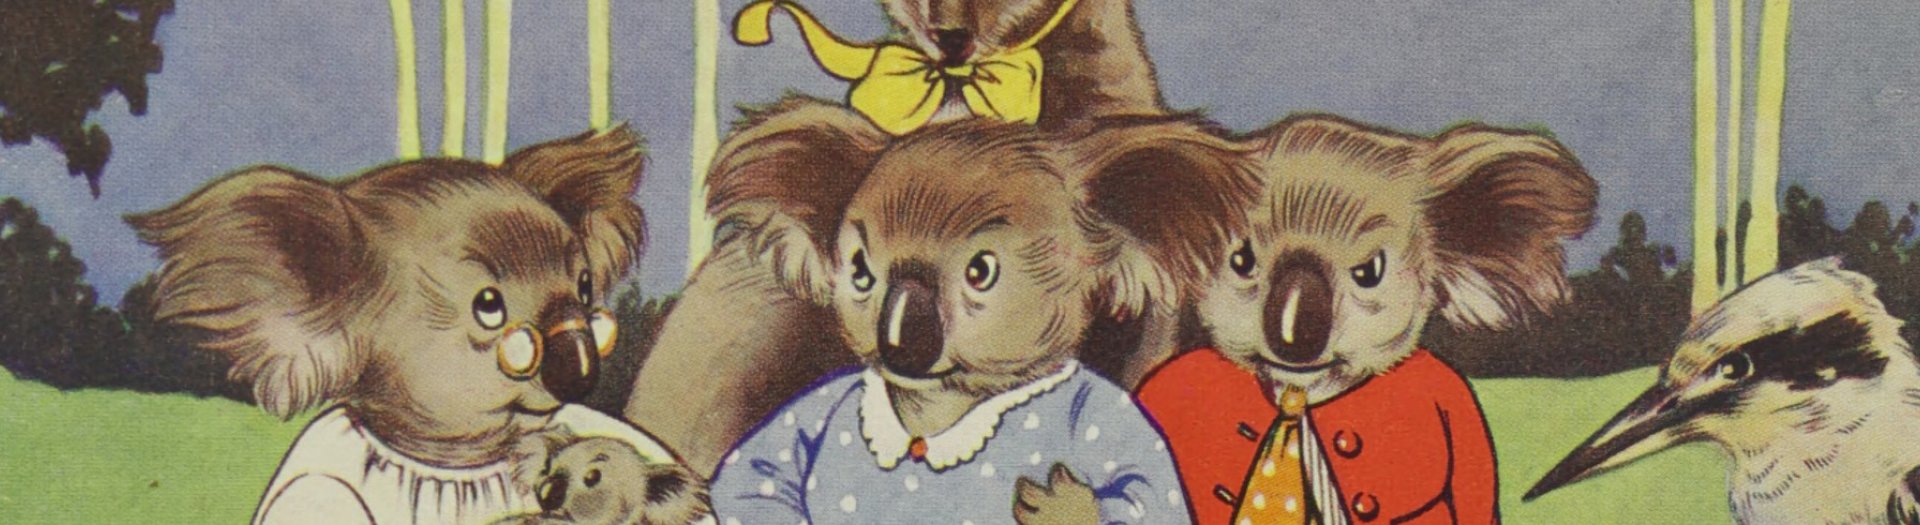 A children's book illustration shows three koalas next to a kookaburra. Trees and grass can be seen in the background